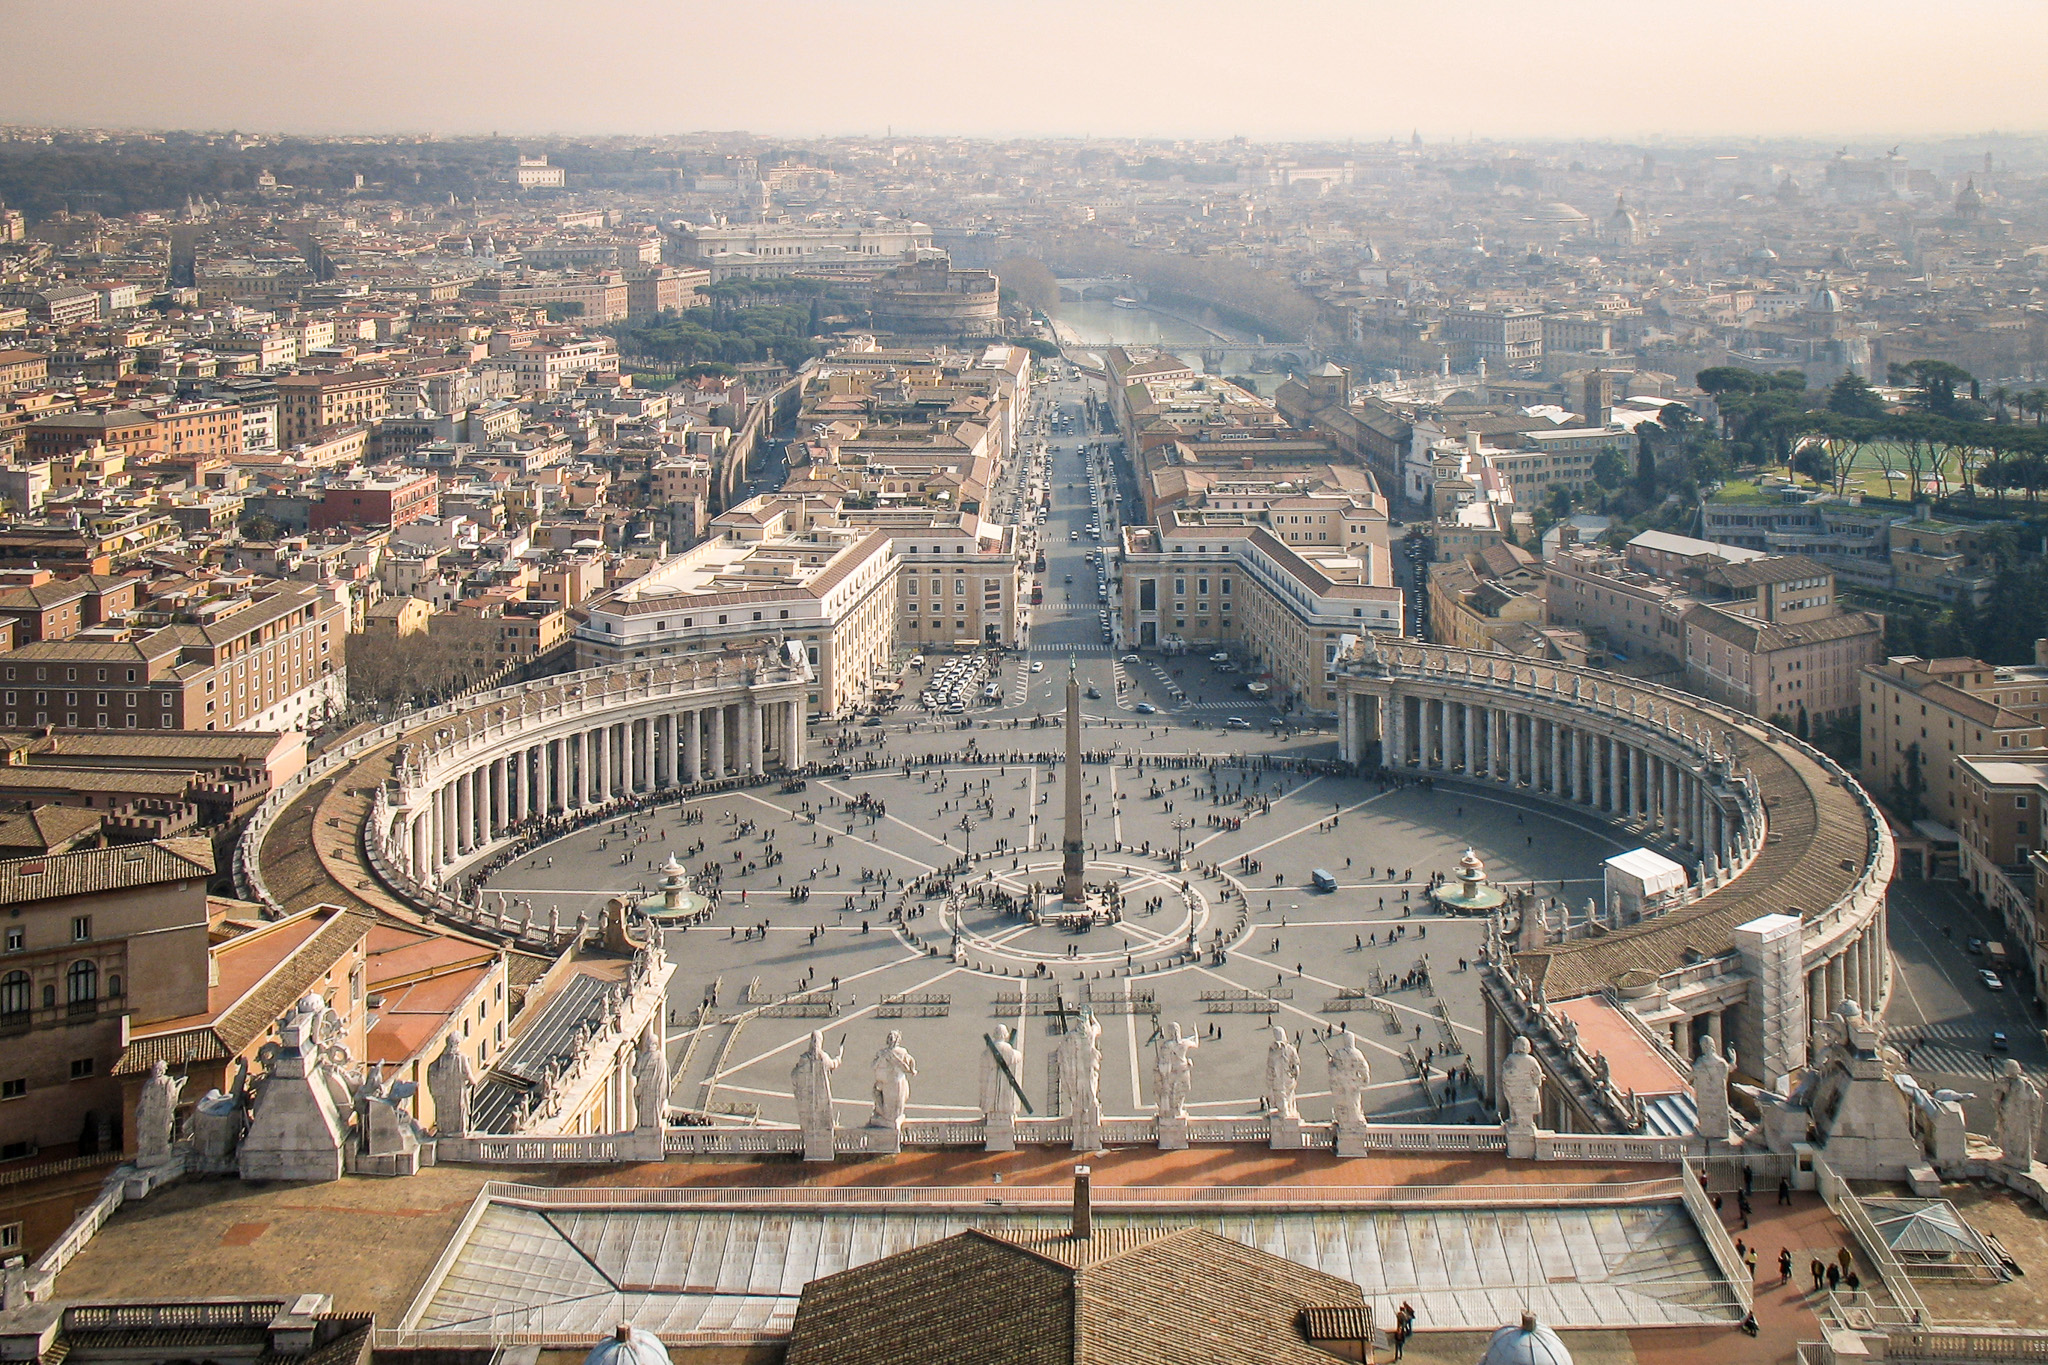 Saint Peter's Square seen from the dome of Saint Peter's Basilica in Vatican City